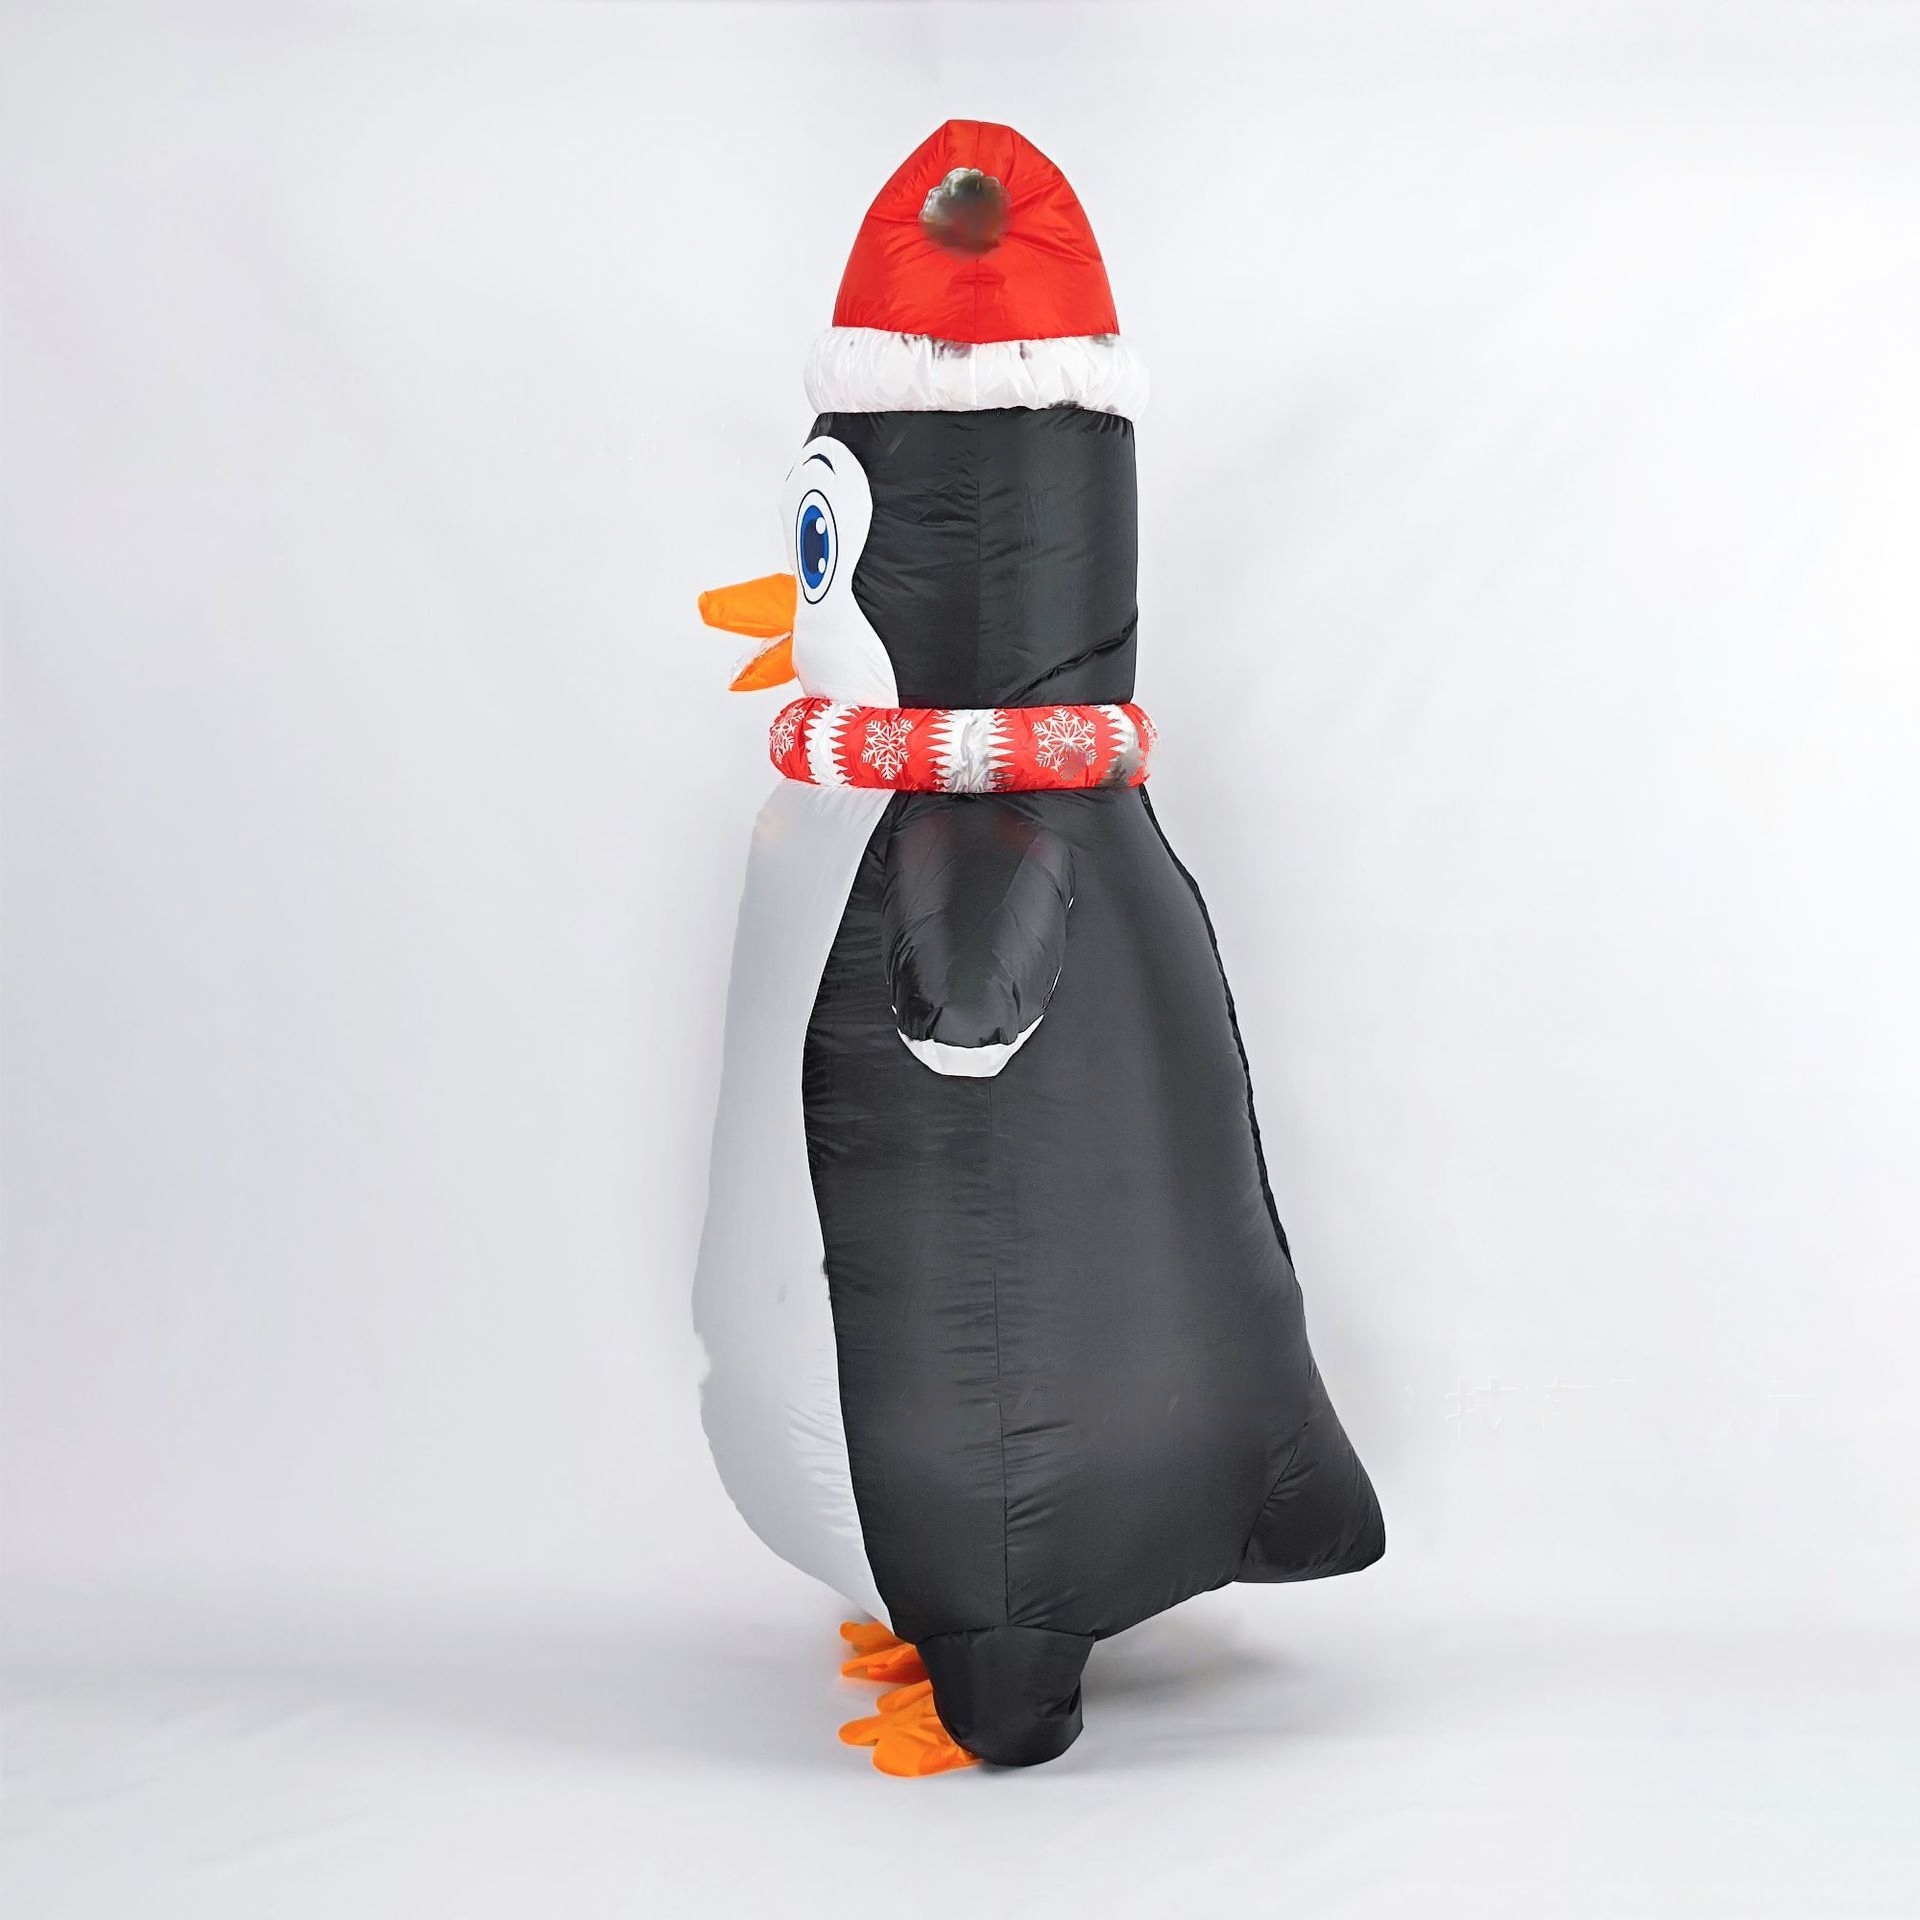 Christmas Penguin Inflatable Costume - Festive Dress-Up with Red Hat and Scarf - Cute and Fun Outfit